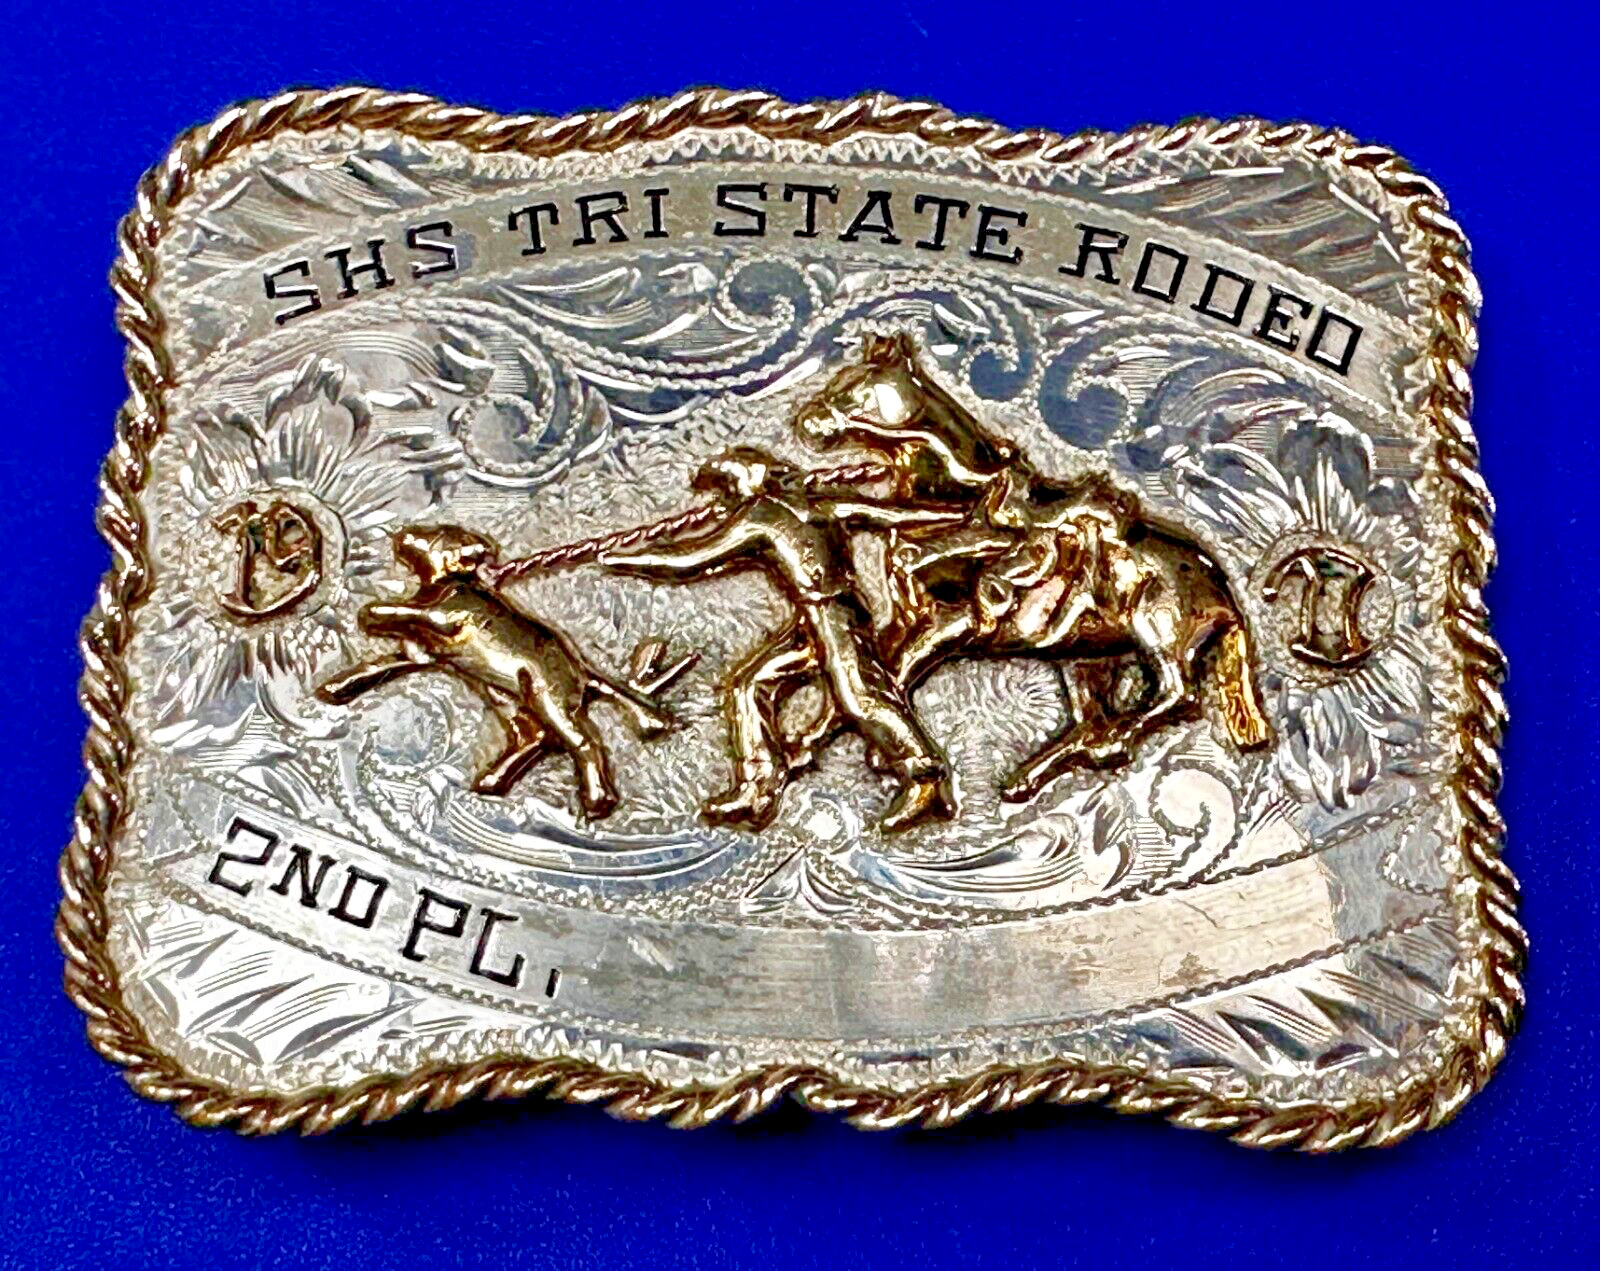 SHS Tri State Rodeo Hand Engraved Sterling Silver B-K Silversmiths Belt Buckle